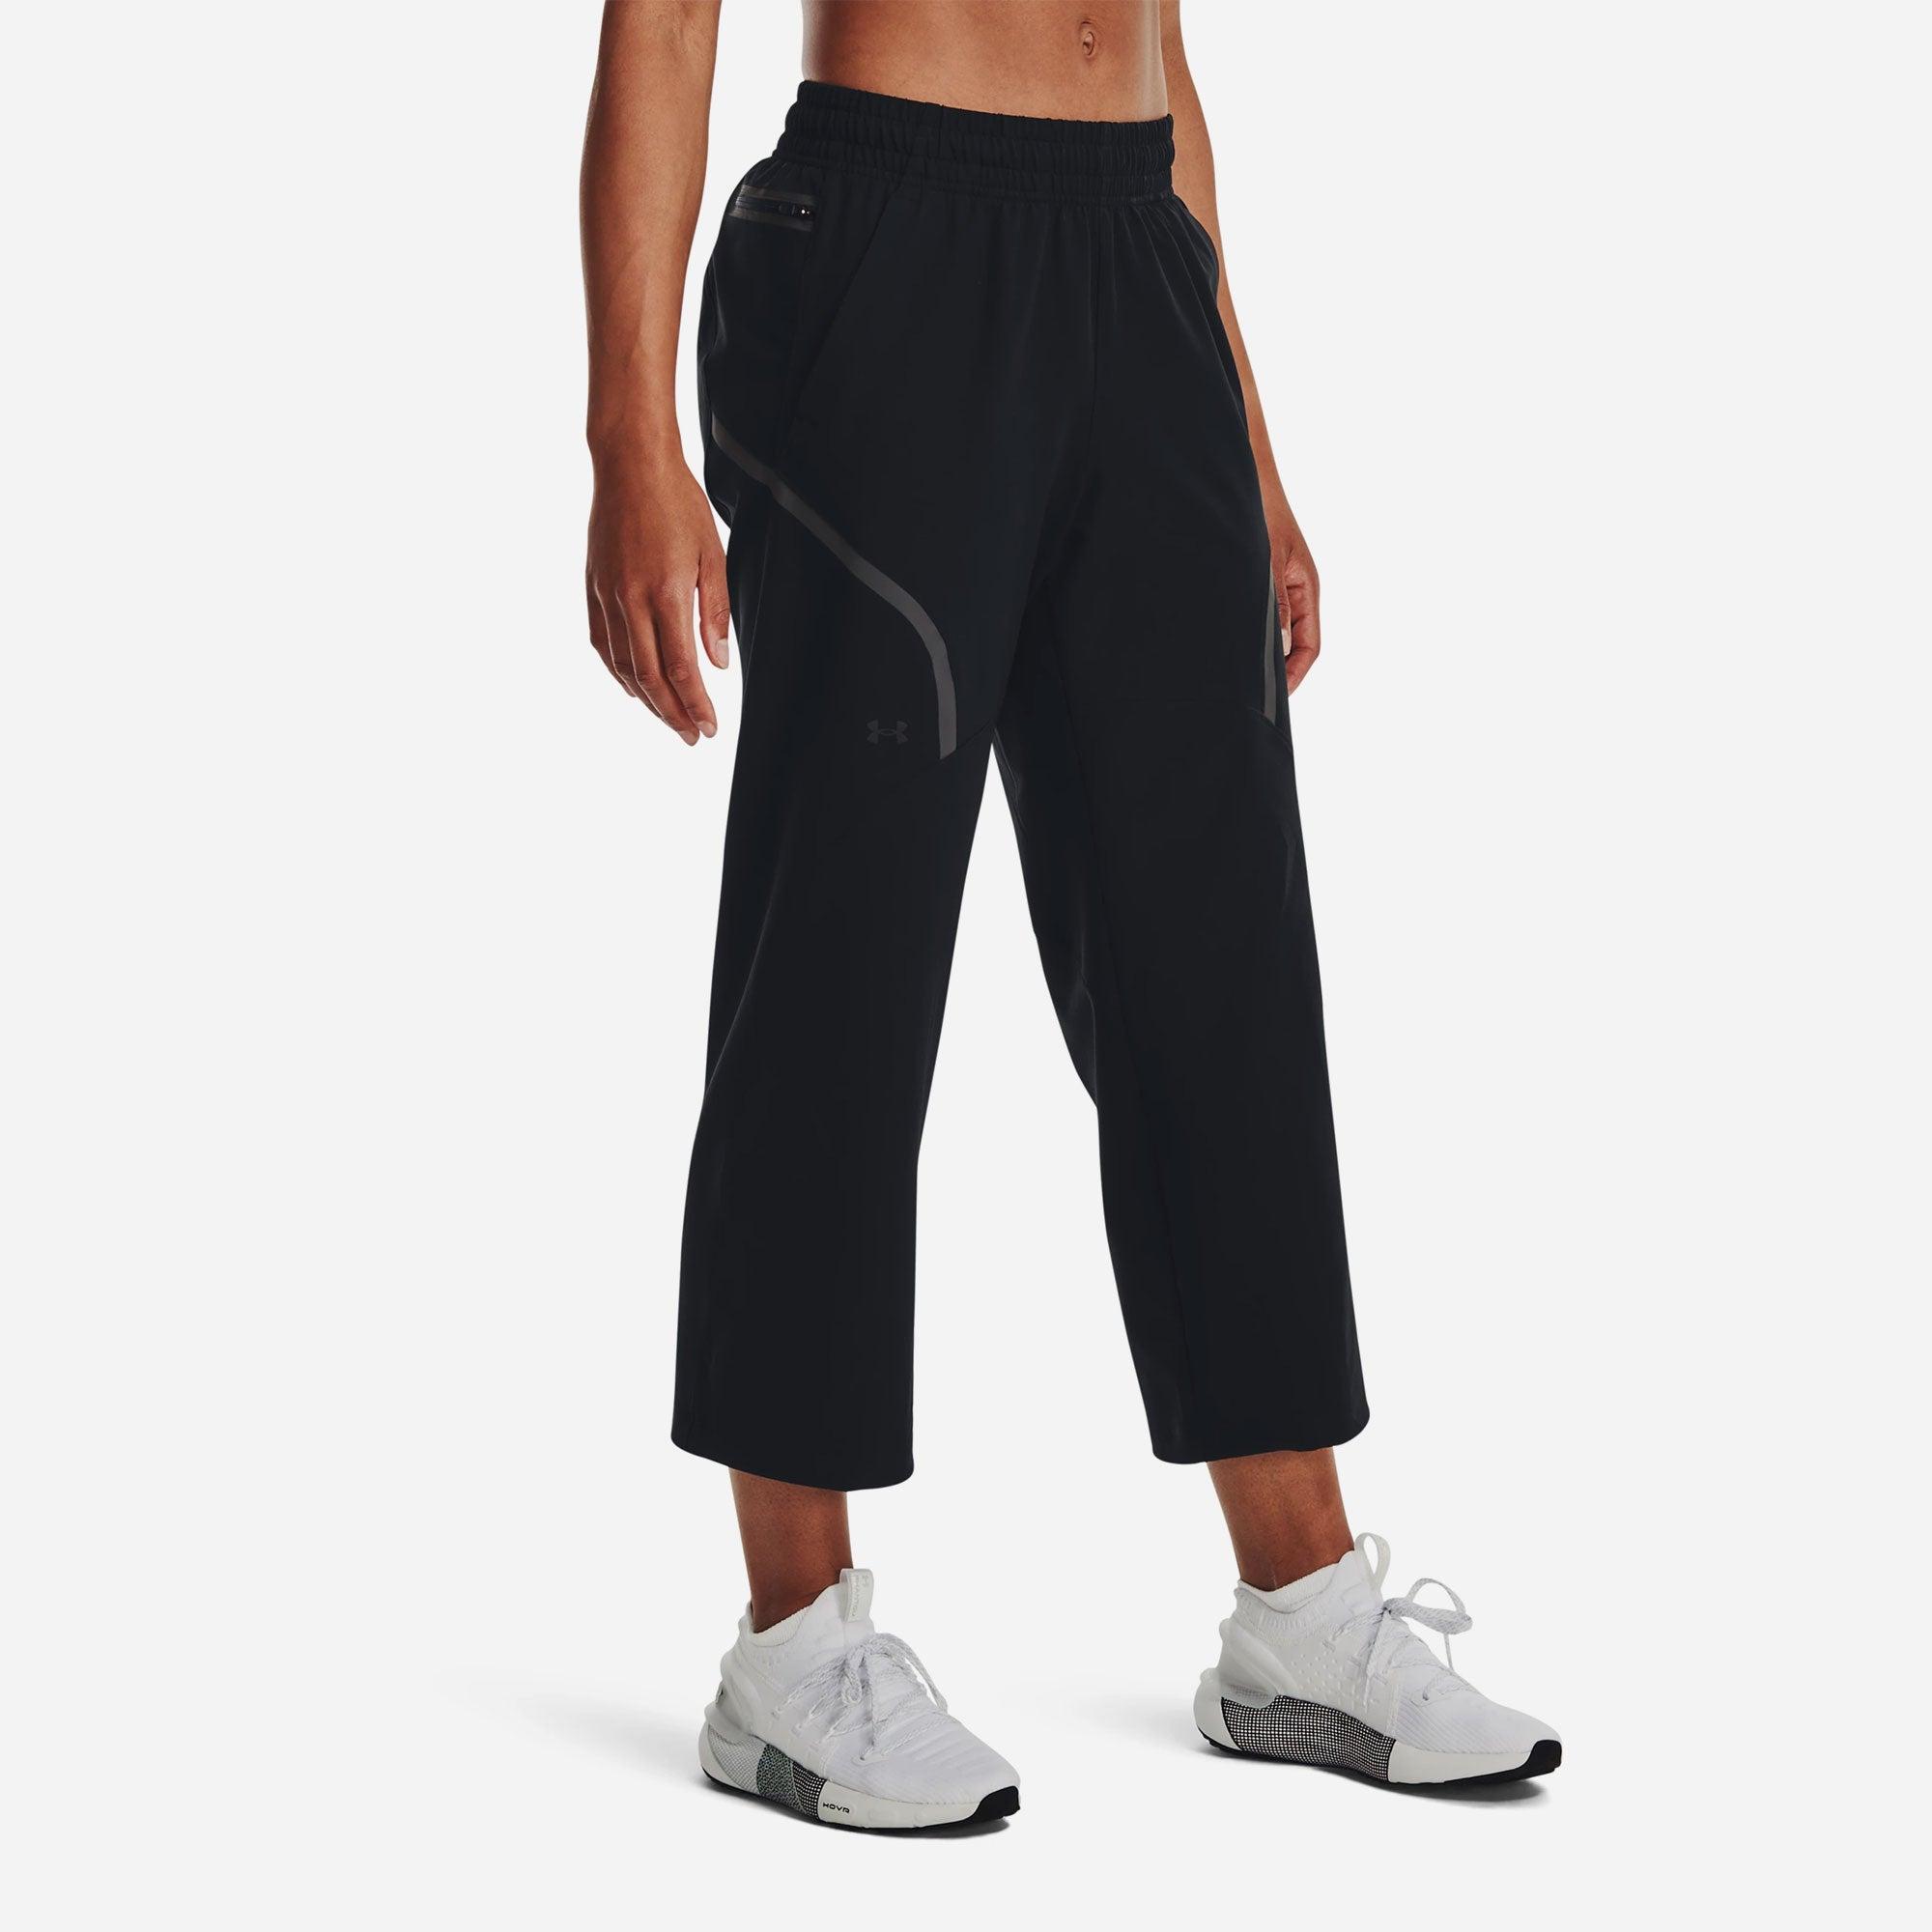 Quần dài thể thao nữ Under Armour Unstoppable - 1376927-001